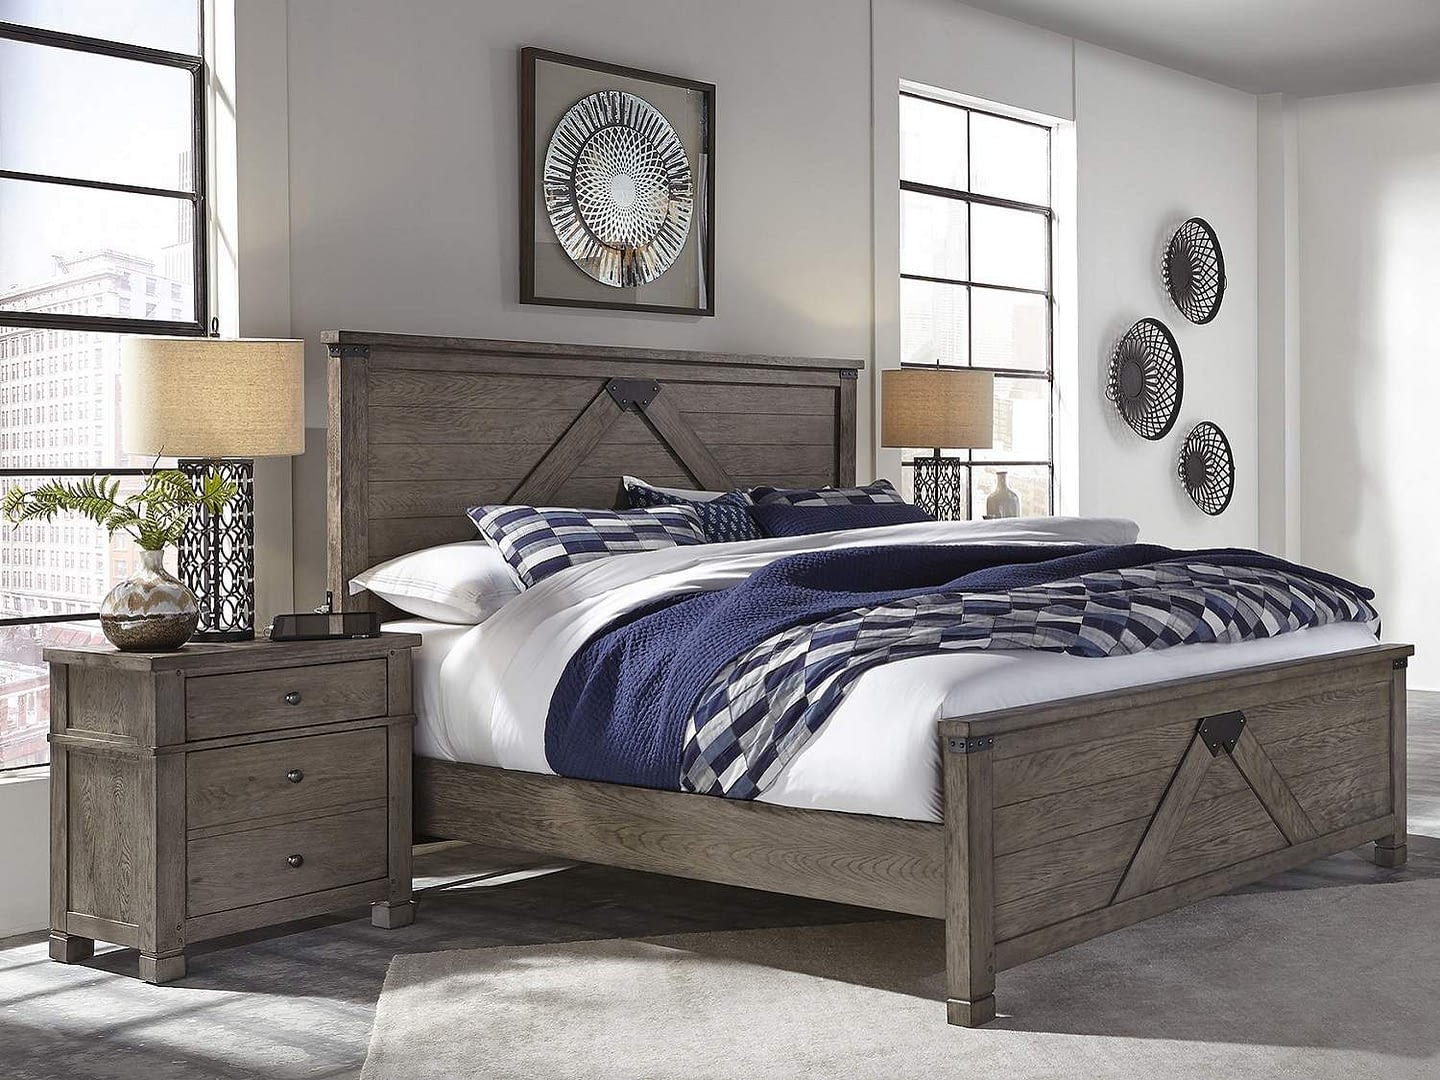 SUMTER Queen Bed & 2 Night Stands - THEMES Furniture & Homestore